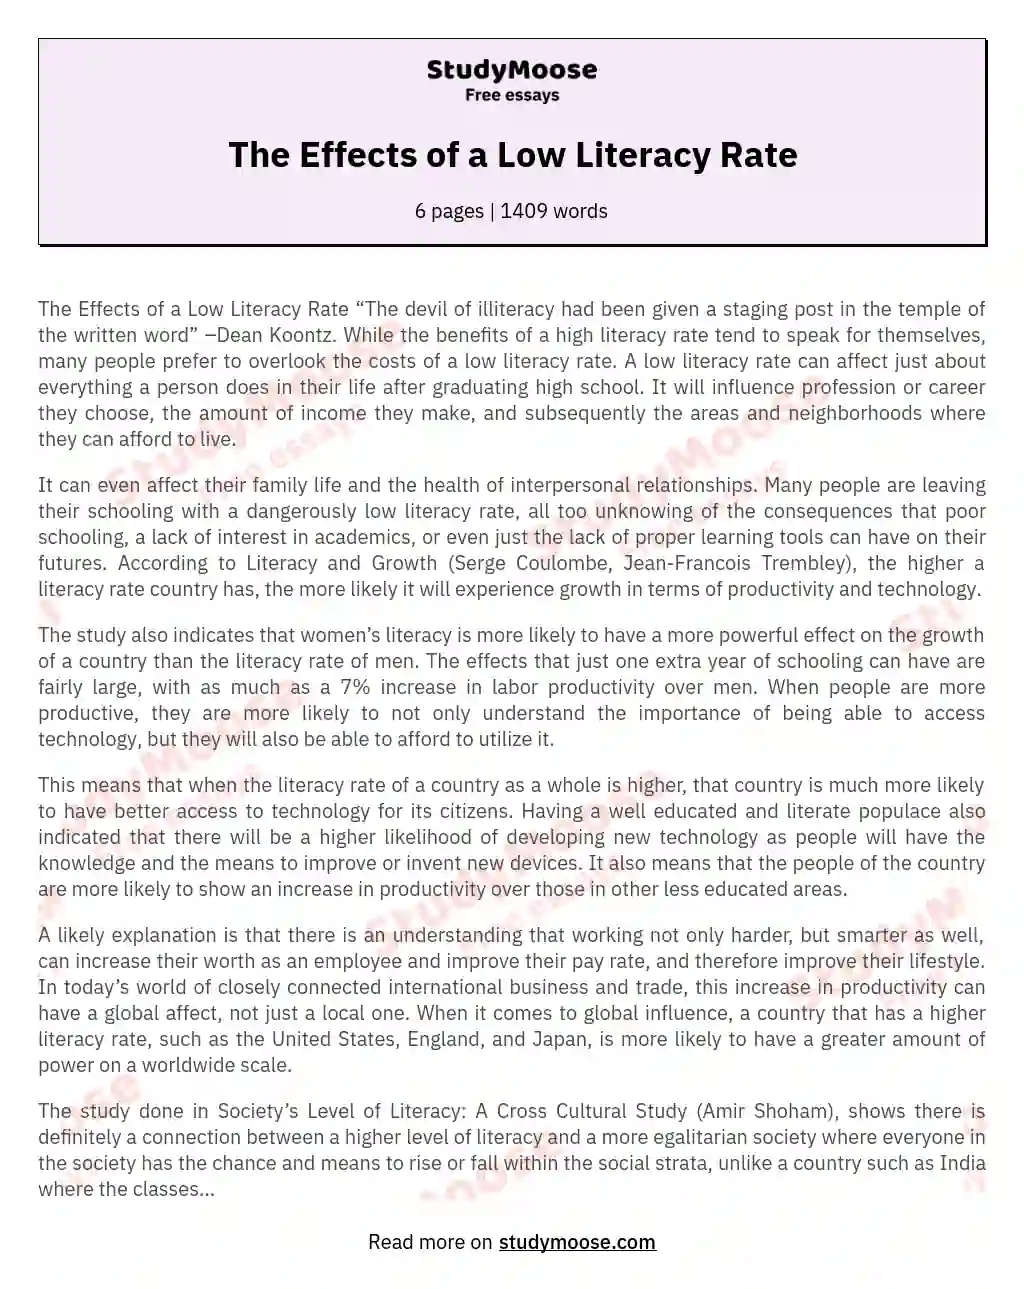 The Effects of a Low Literacy Rate essay